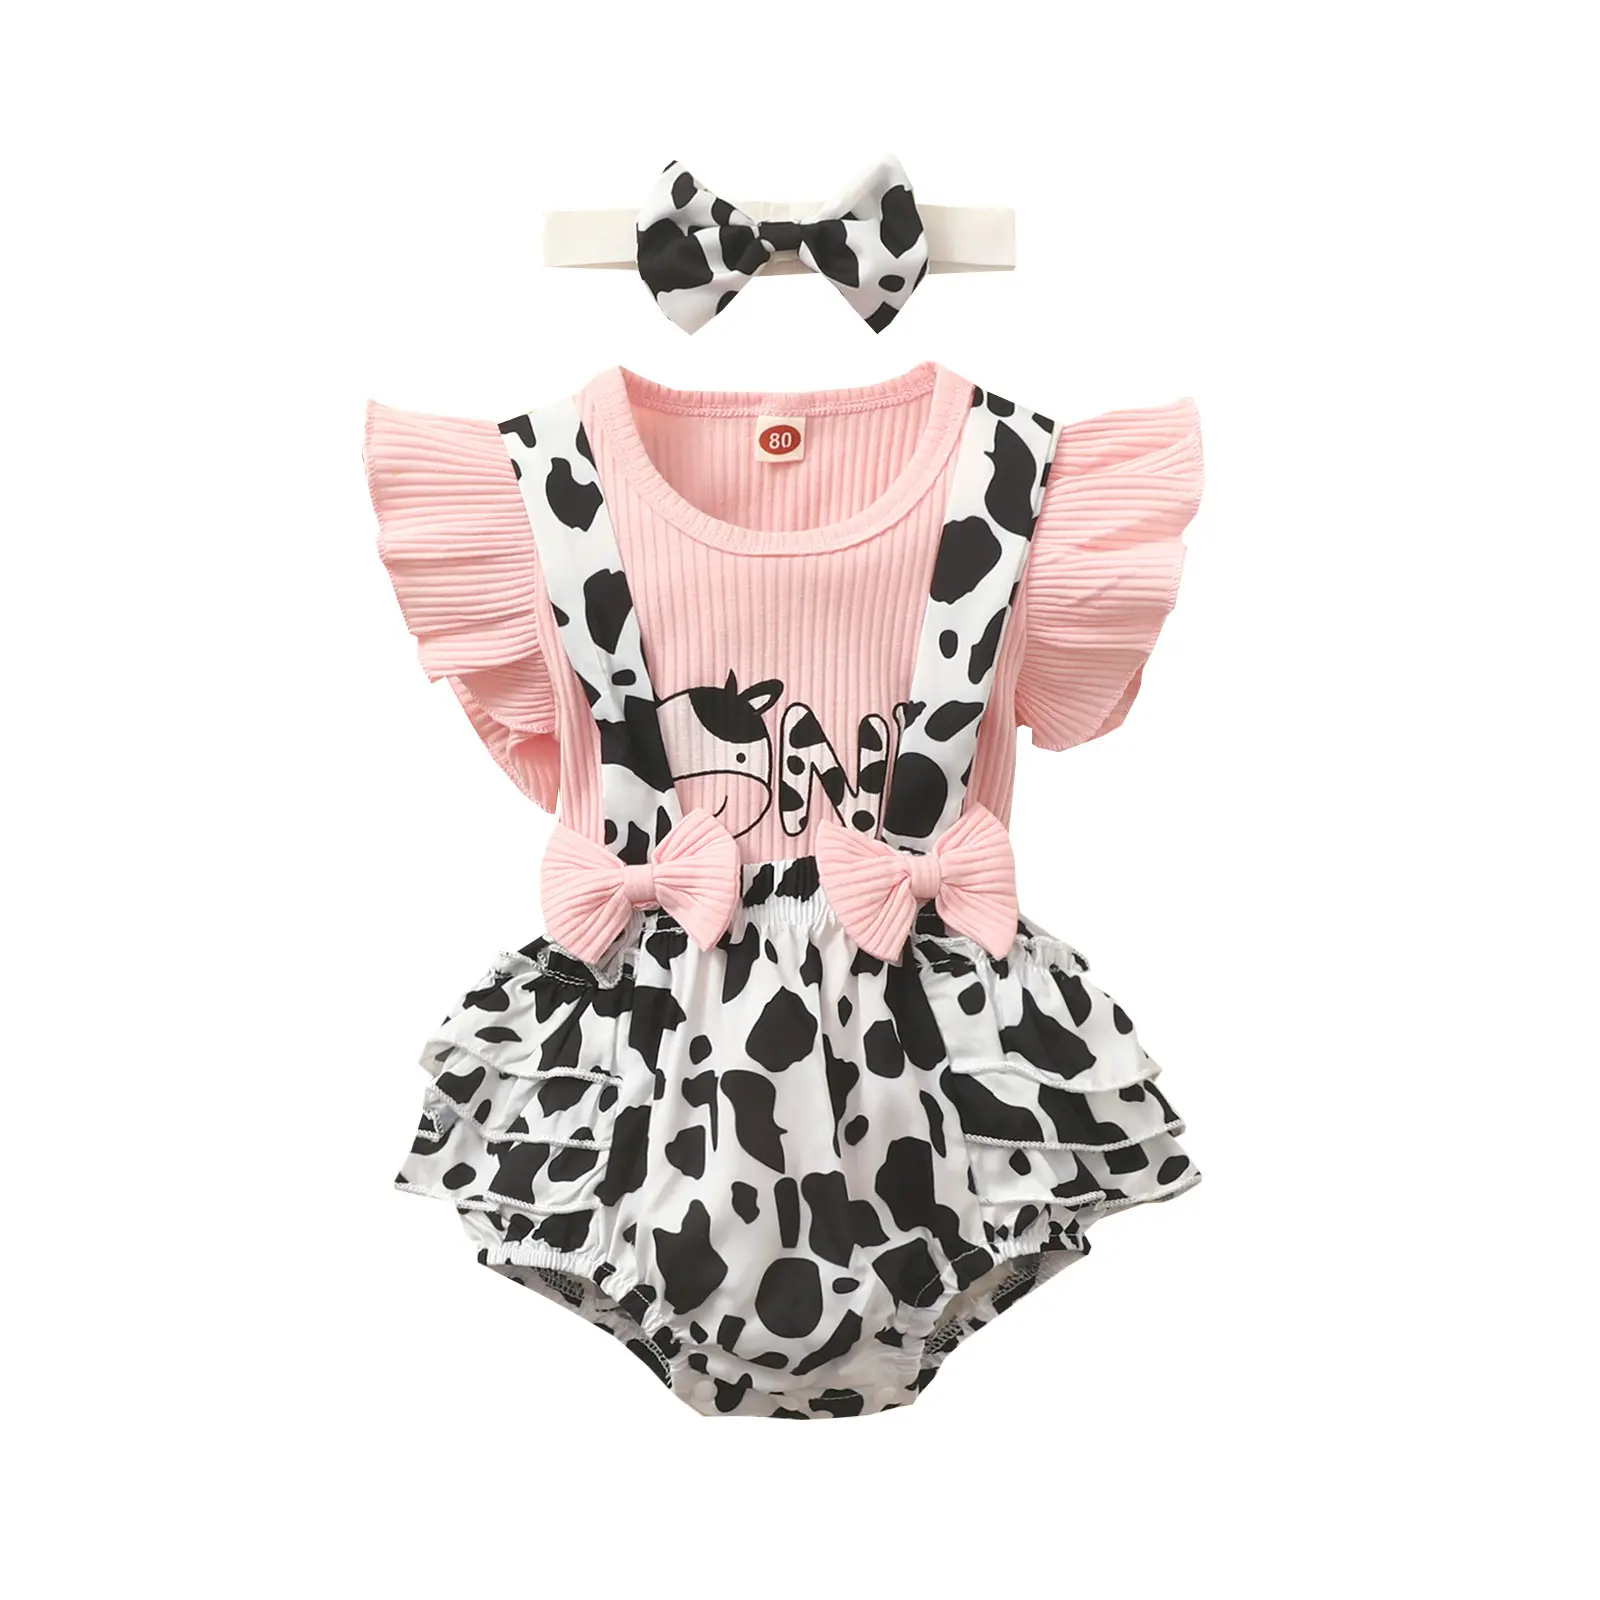 New Design Baby Clothes Set,Girl Summer Clothes ,Girls Dress Swing Top Set